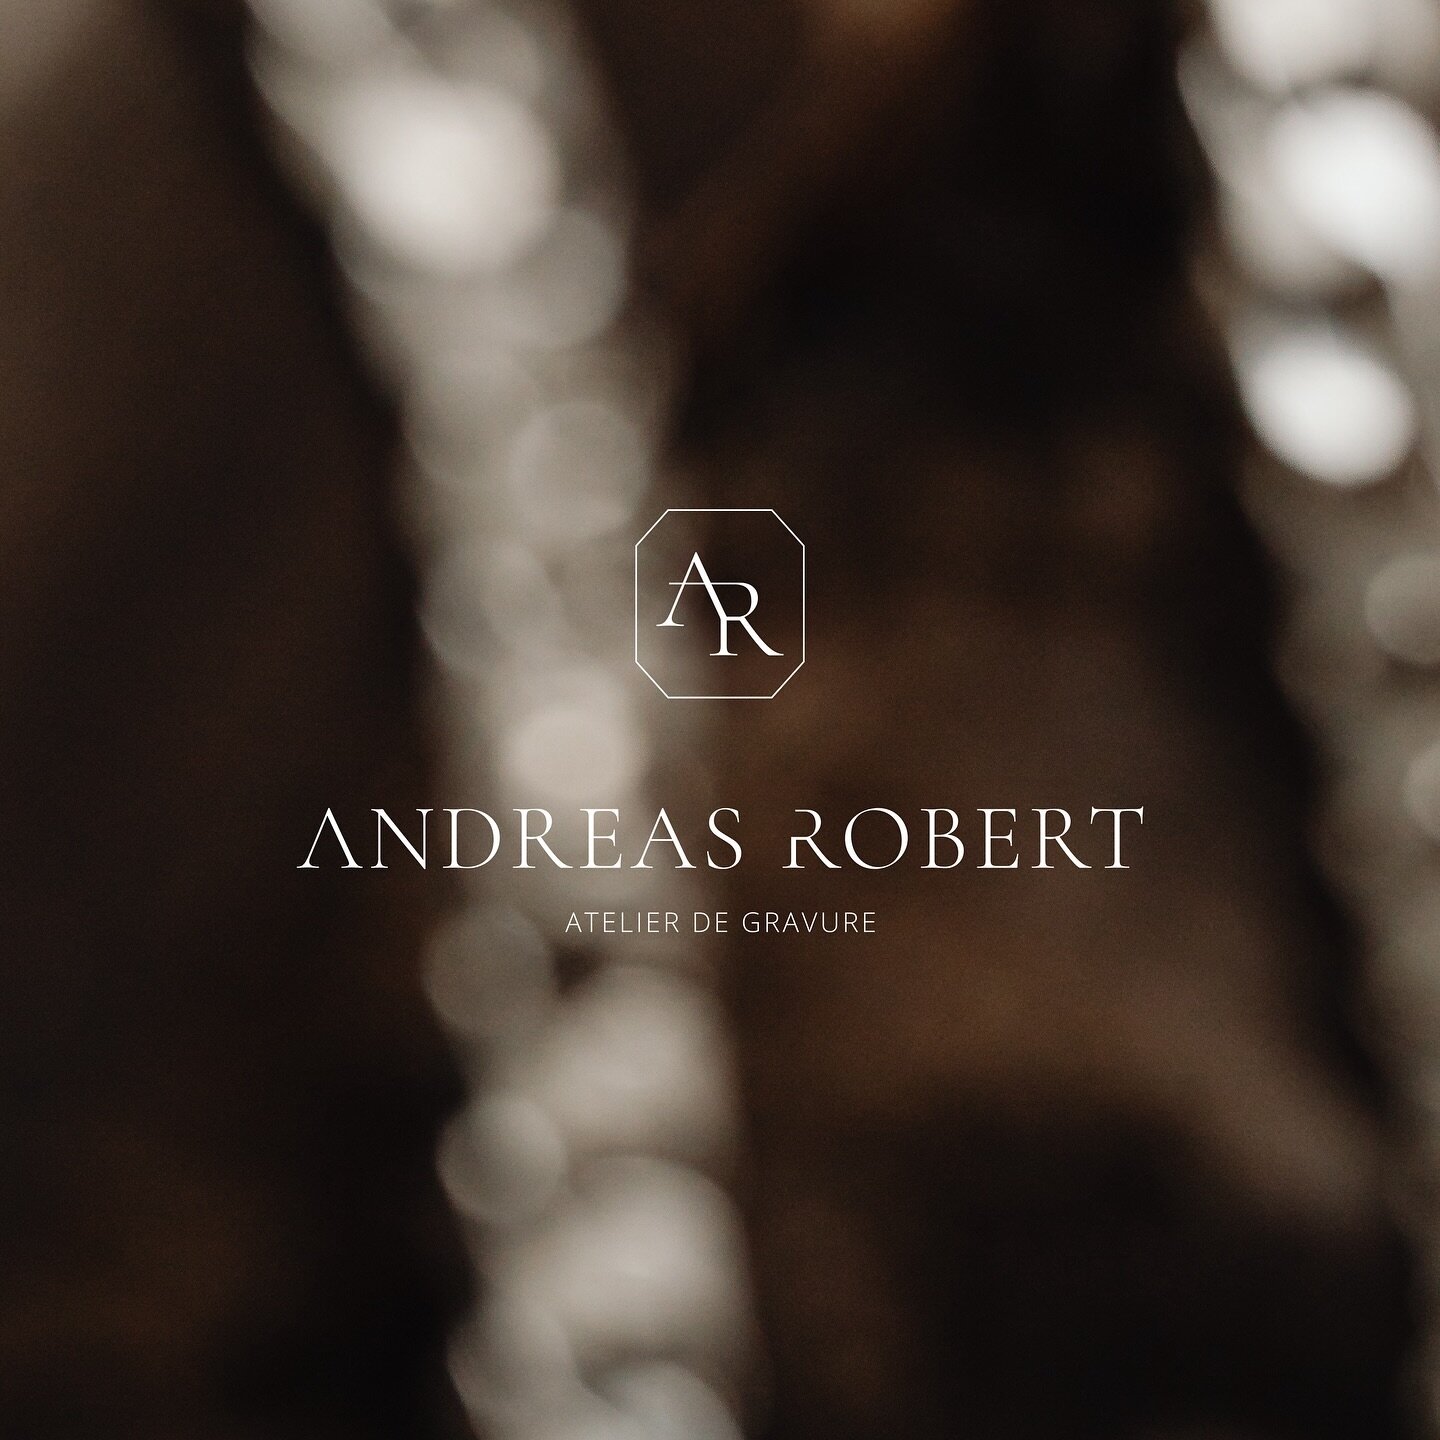 New logo for @andreasrobert_engraver! A high-end and minimalist logo in our sophisticated style. Wishing you a successful start in 2024, Andreas!

#logo #minimal #design #branding #lanes